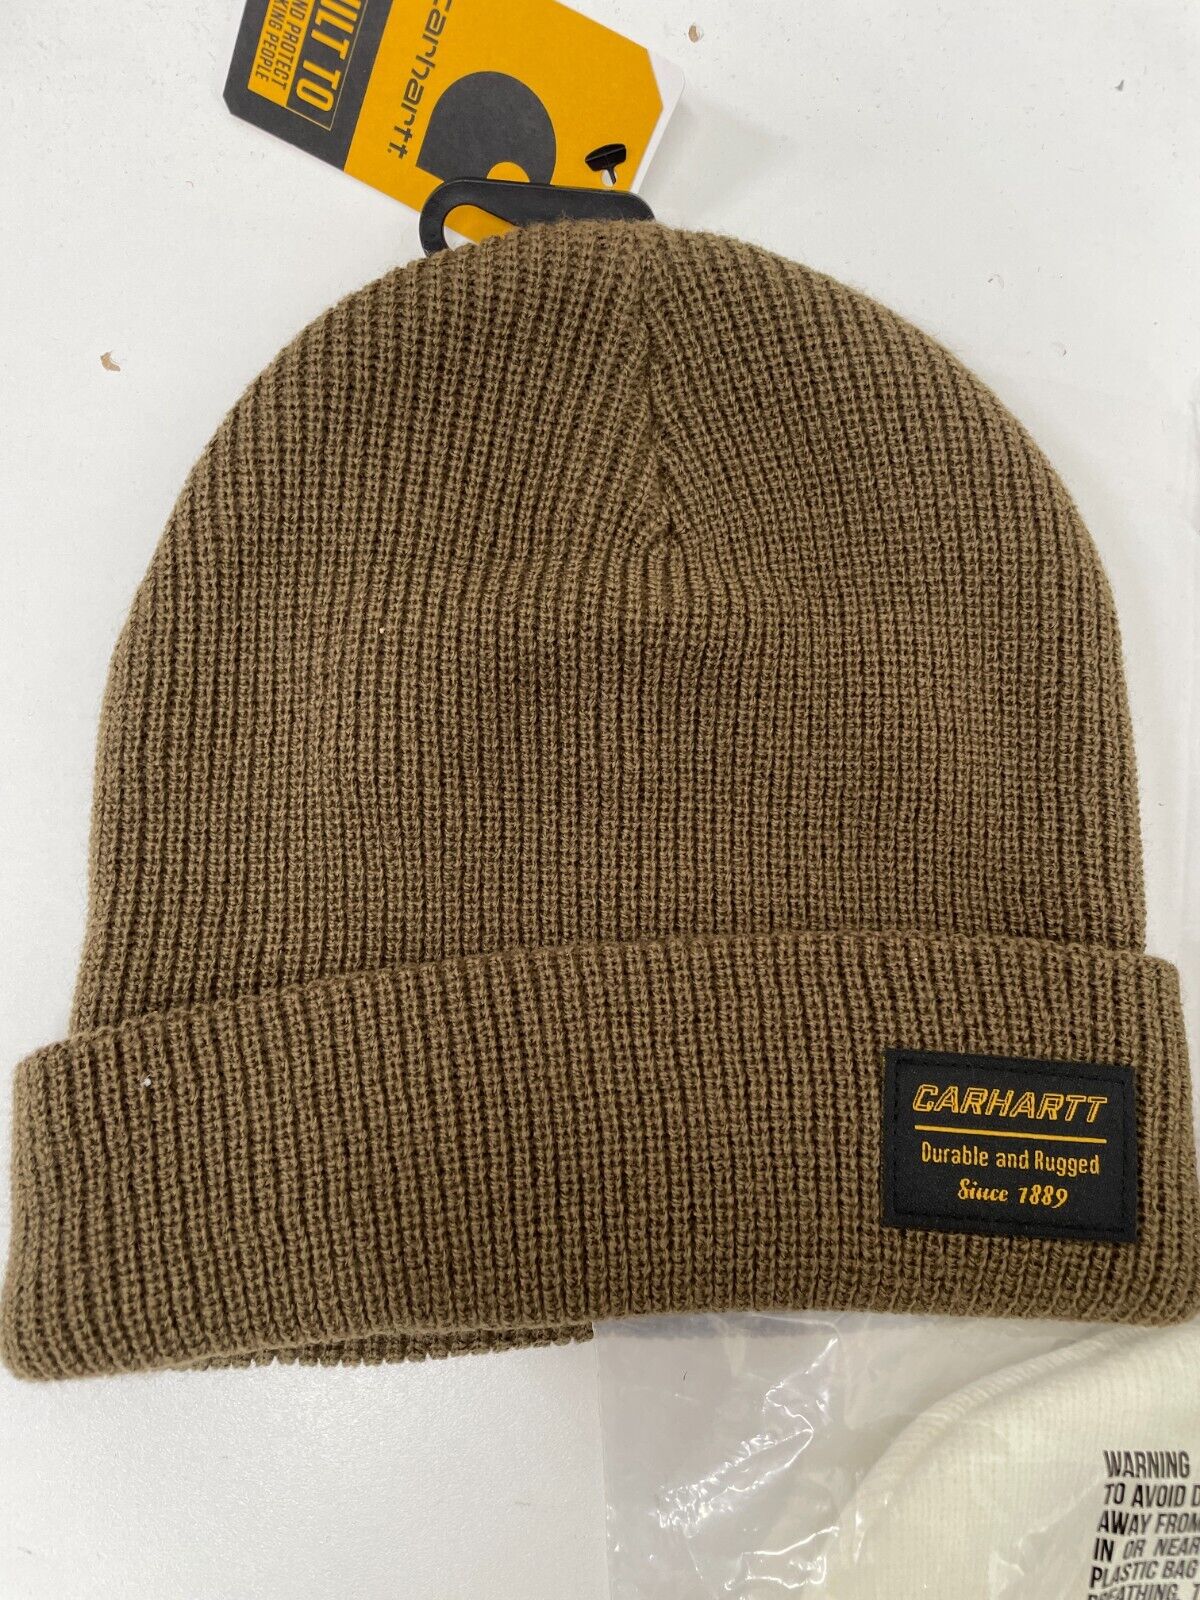 Carhartt Mens One Size Beanie Hat White Brown Black Ribbed Acrylic Knit Lot of 3